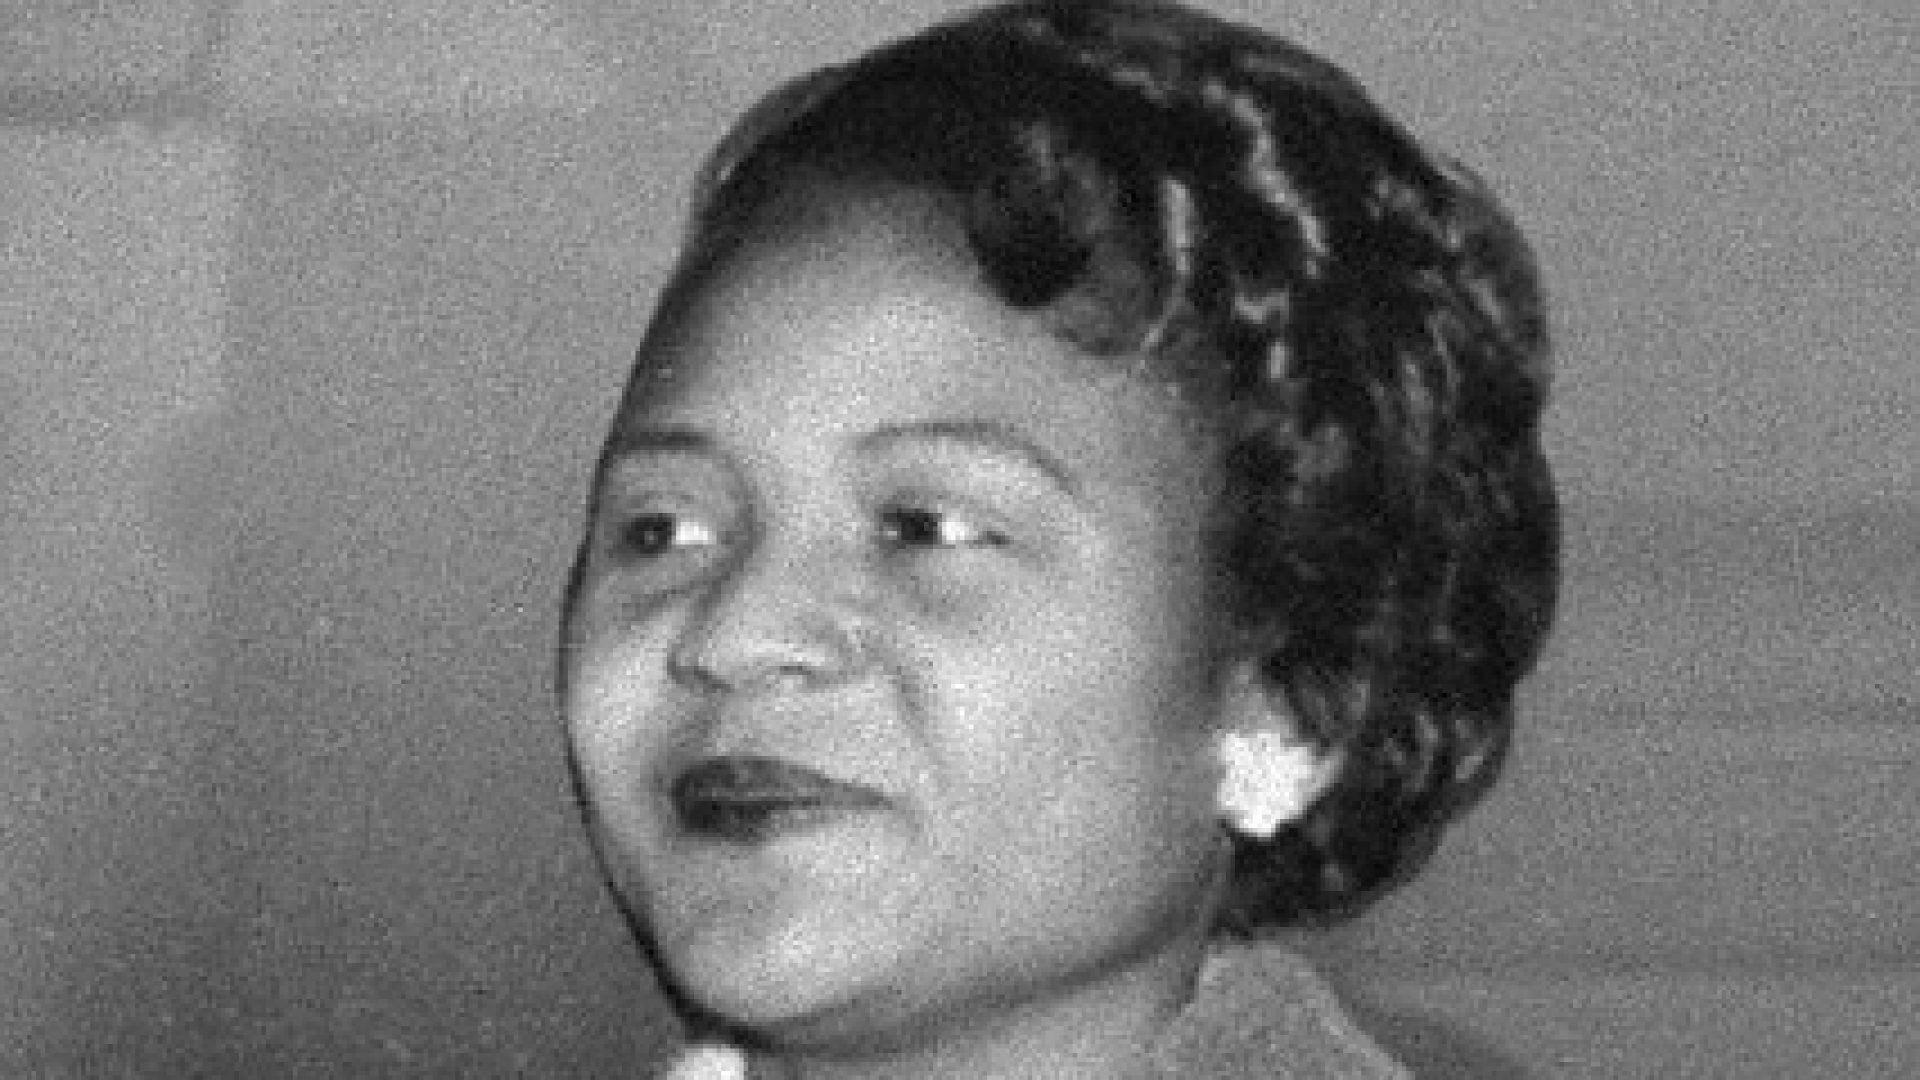 Autherine Lucy Foster Replaces Ku Klux Klan Leader On University of Alabama’s Campus